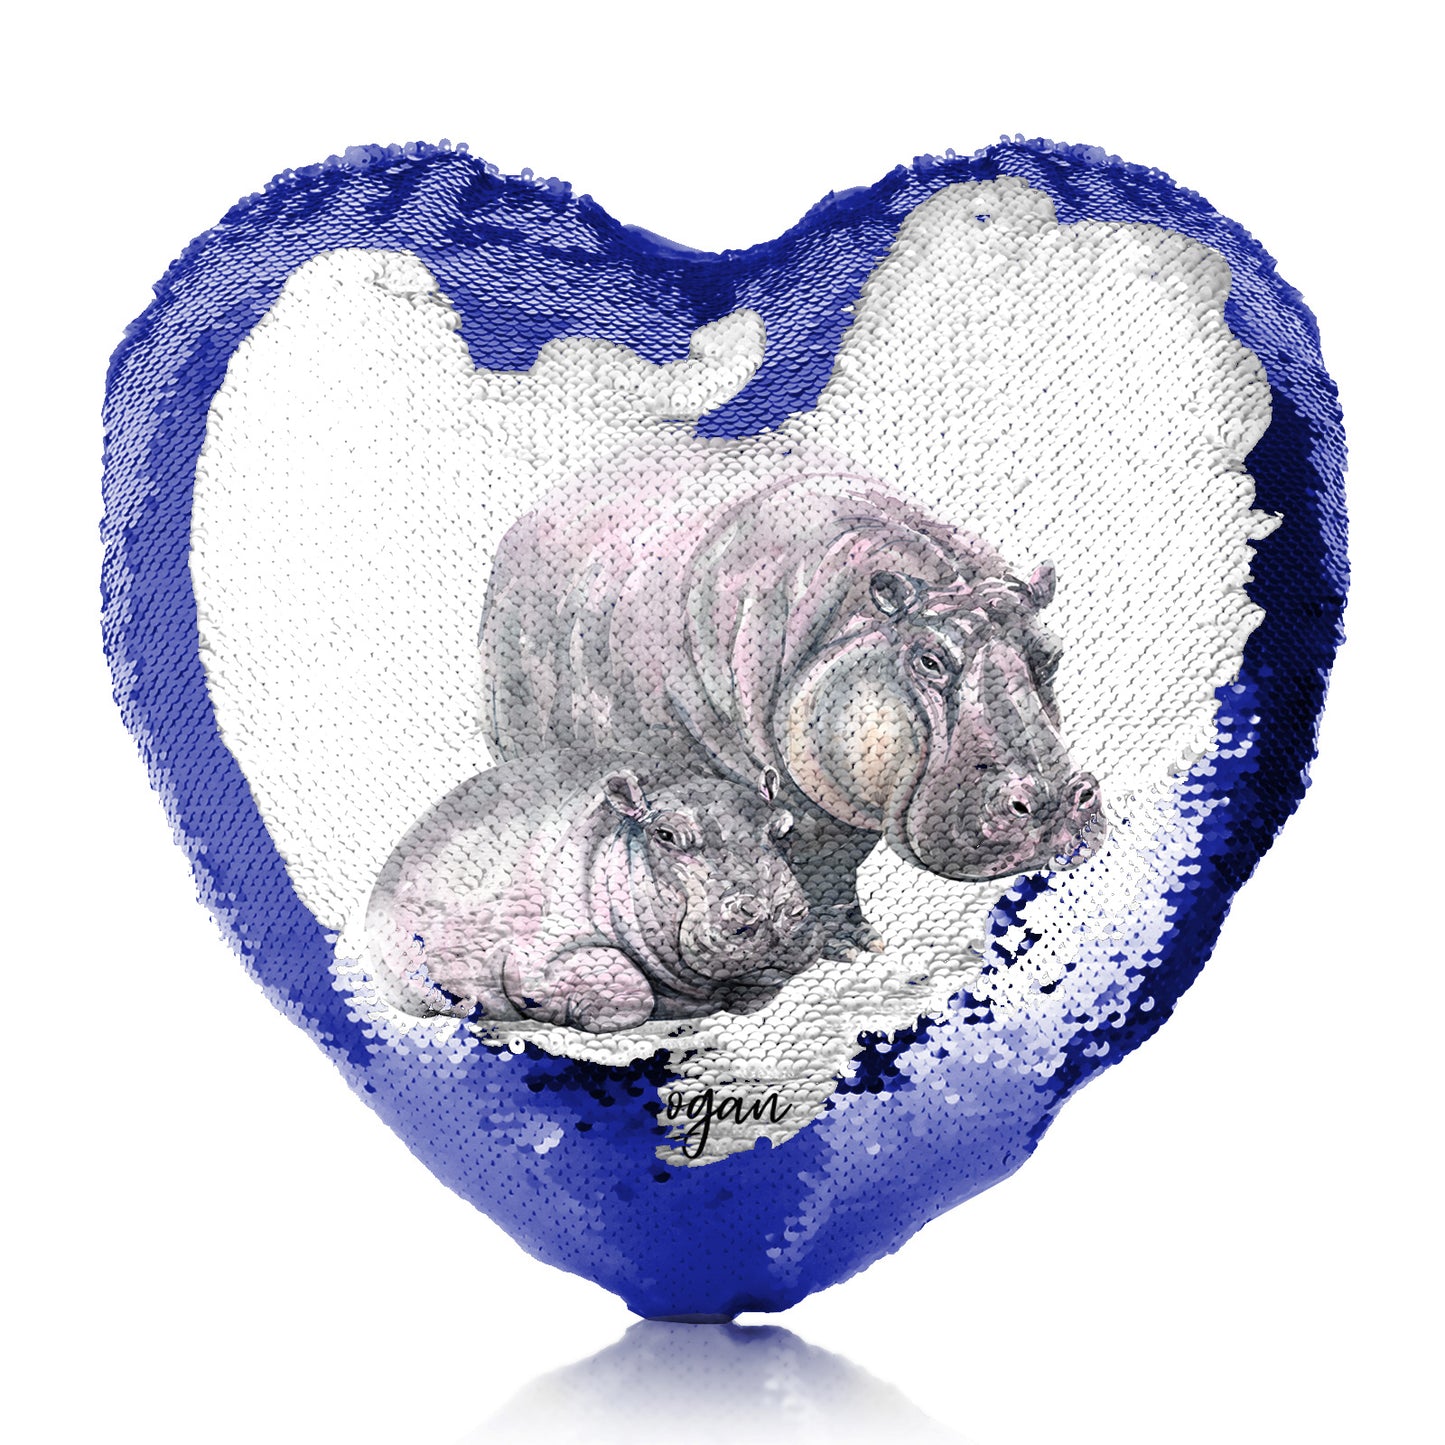 Personalised Sequin Heart Cushion with Welcoming Text and Relaxing Mum and Baby Hippos